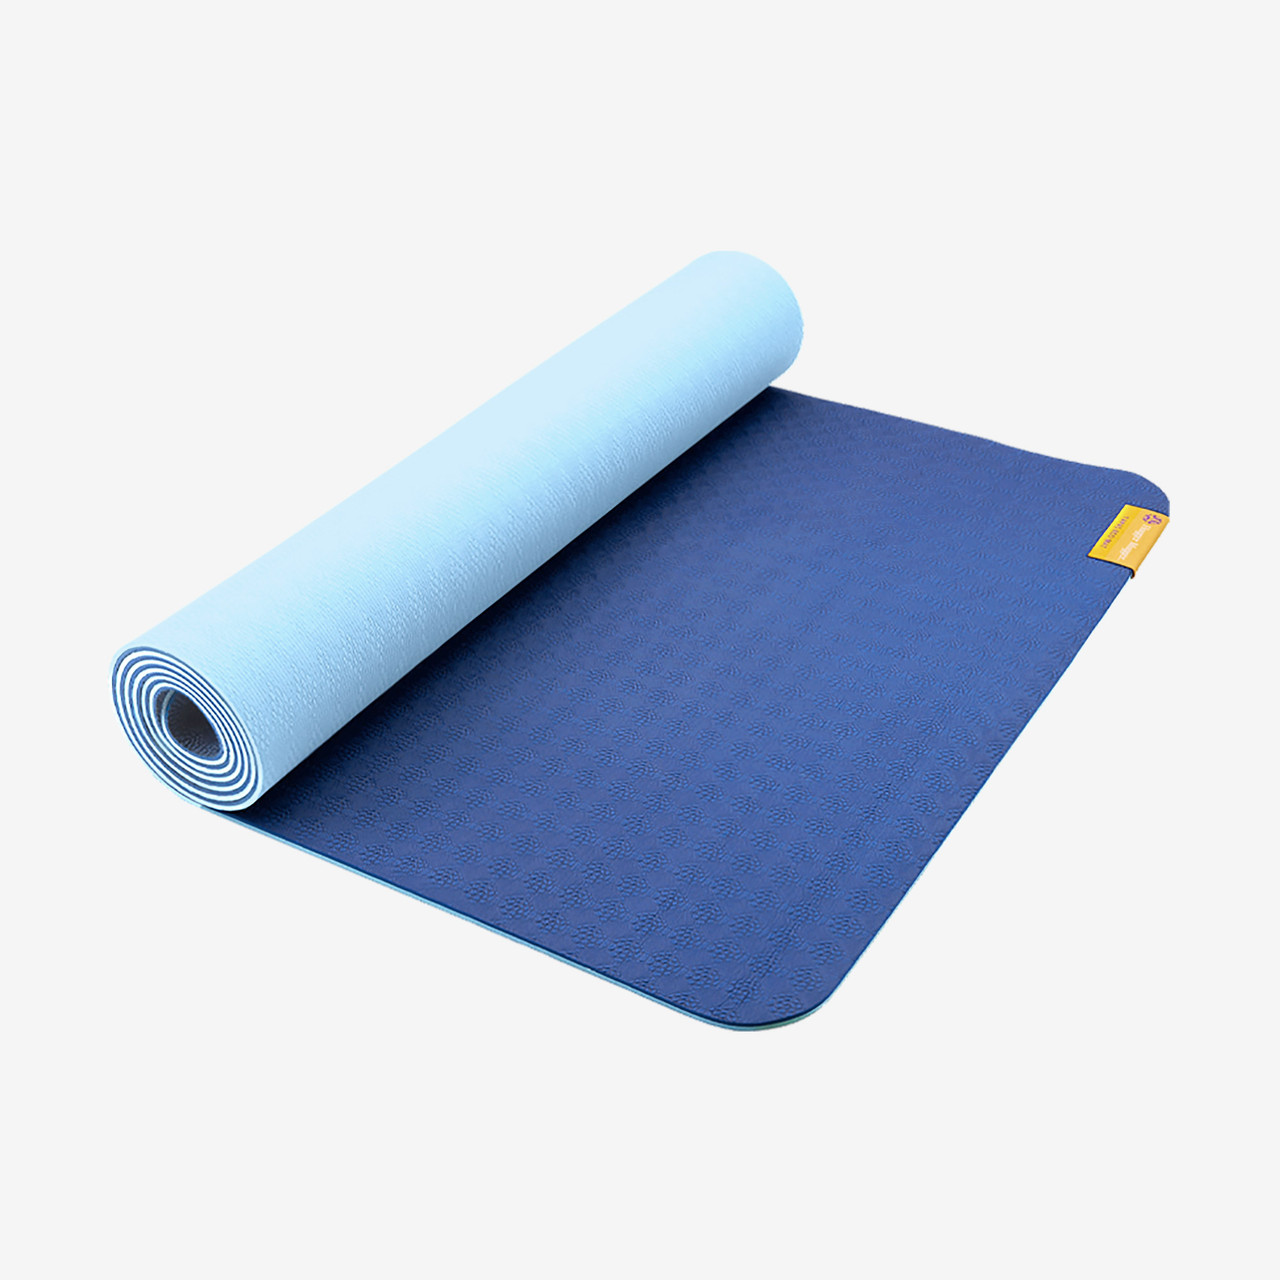 Blue Yoga Mat - Light Blue/Turquoise/Sky Blue for your ideal yoga practice